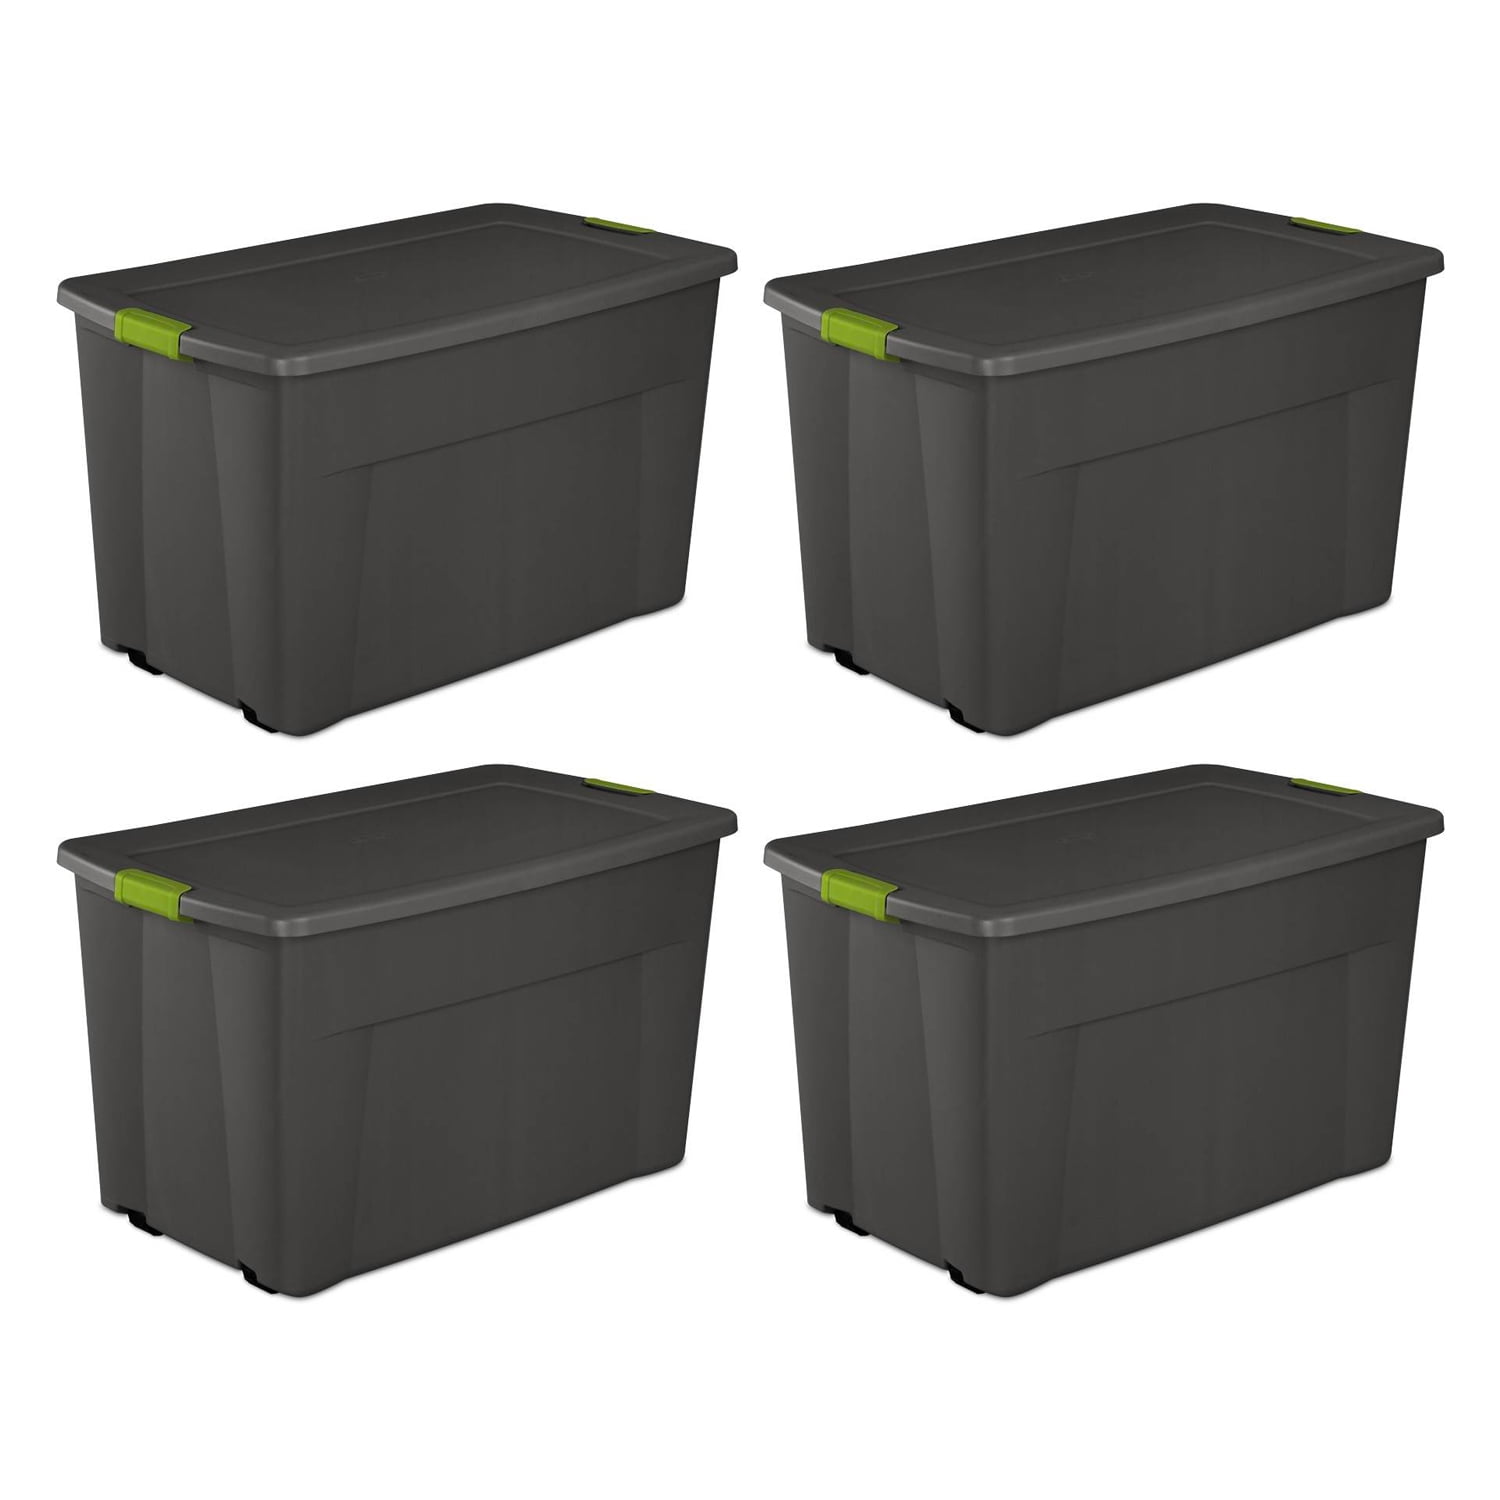 45 Litre Very Strong Grey Plastic Euro Parts Storage Container Boxes Box Bins 